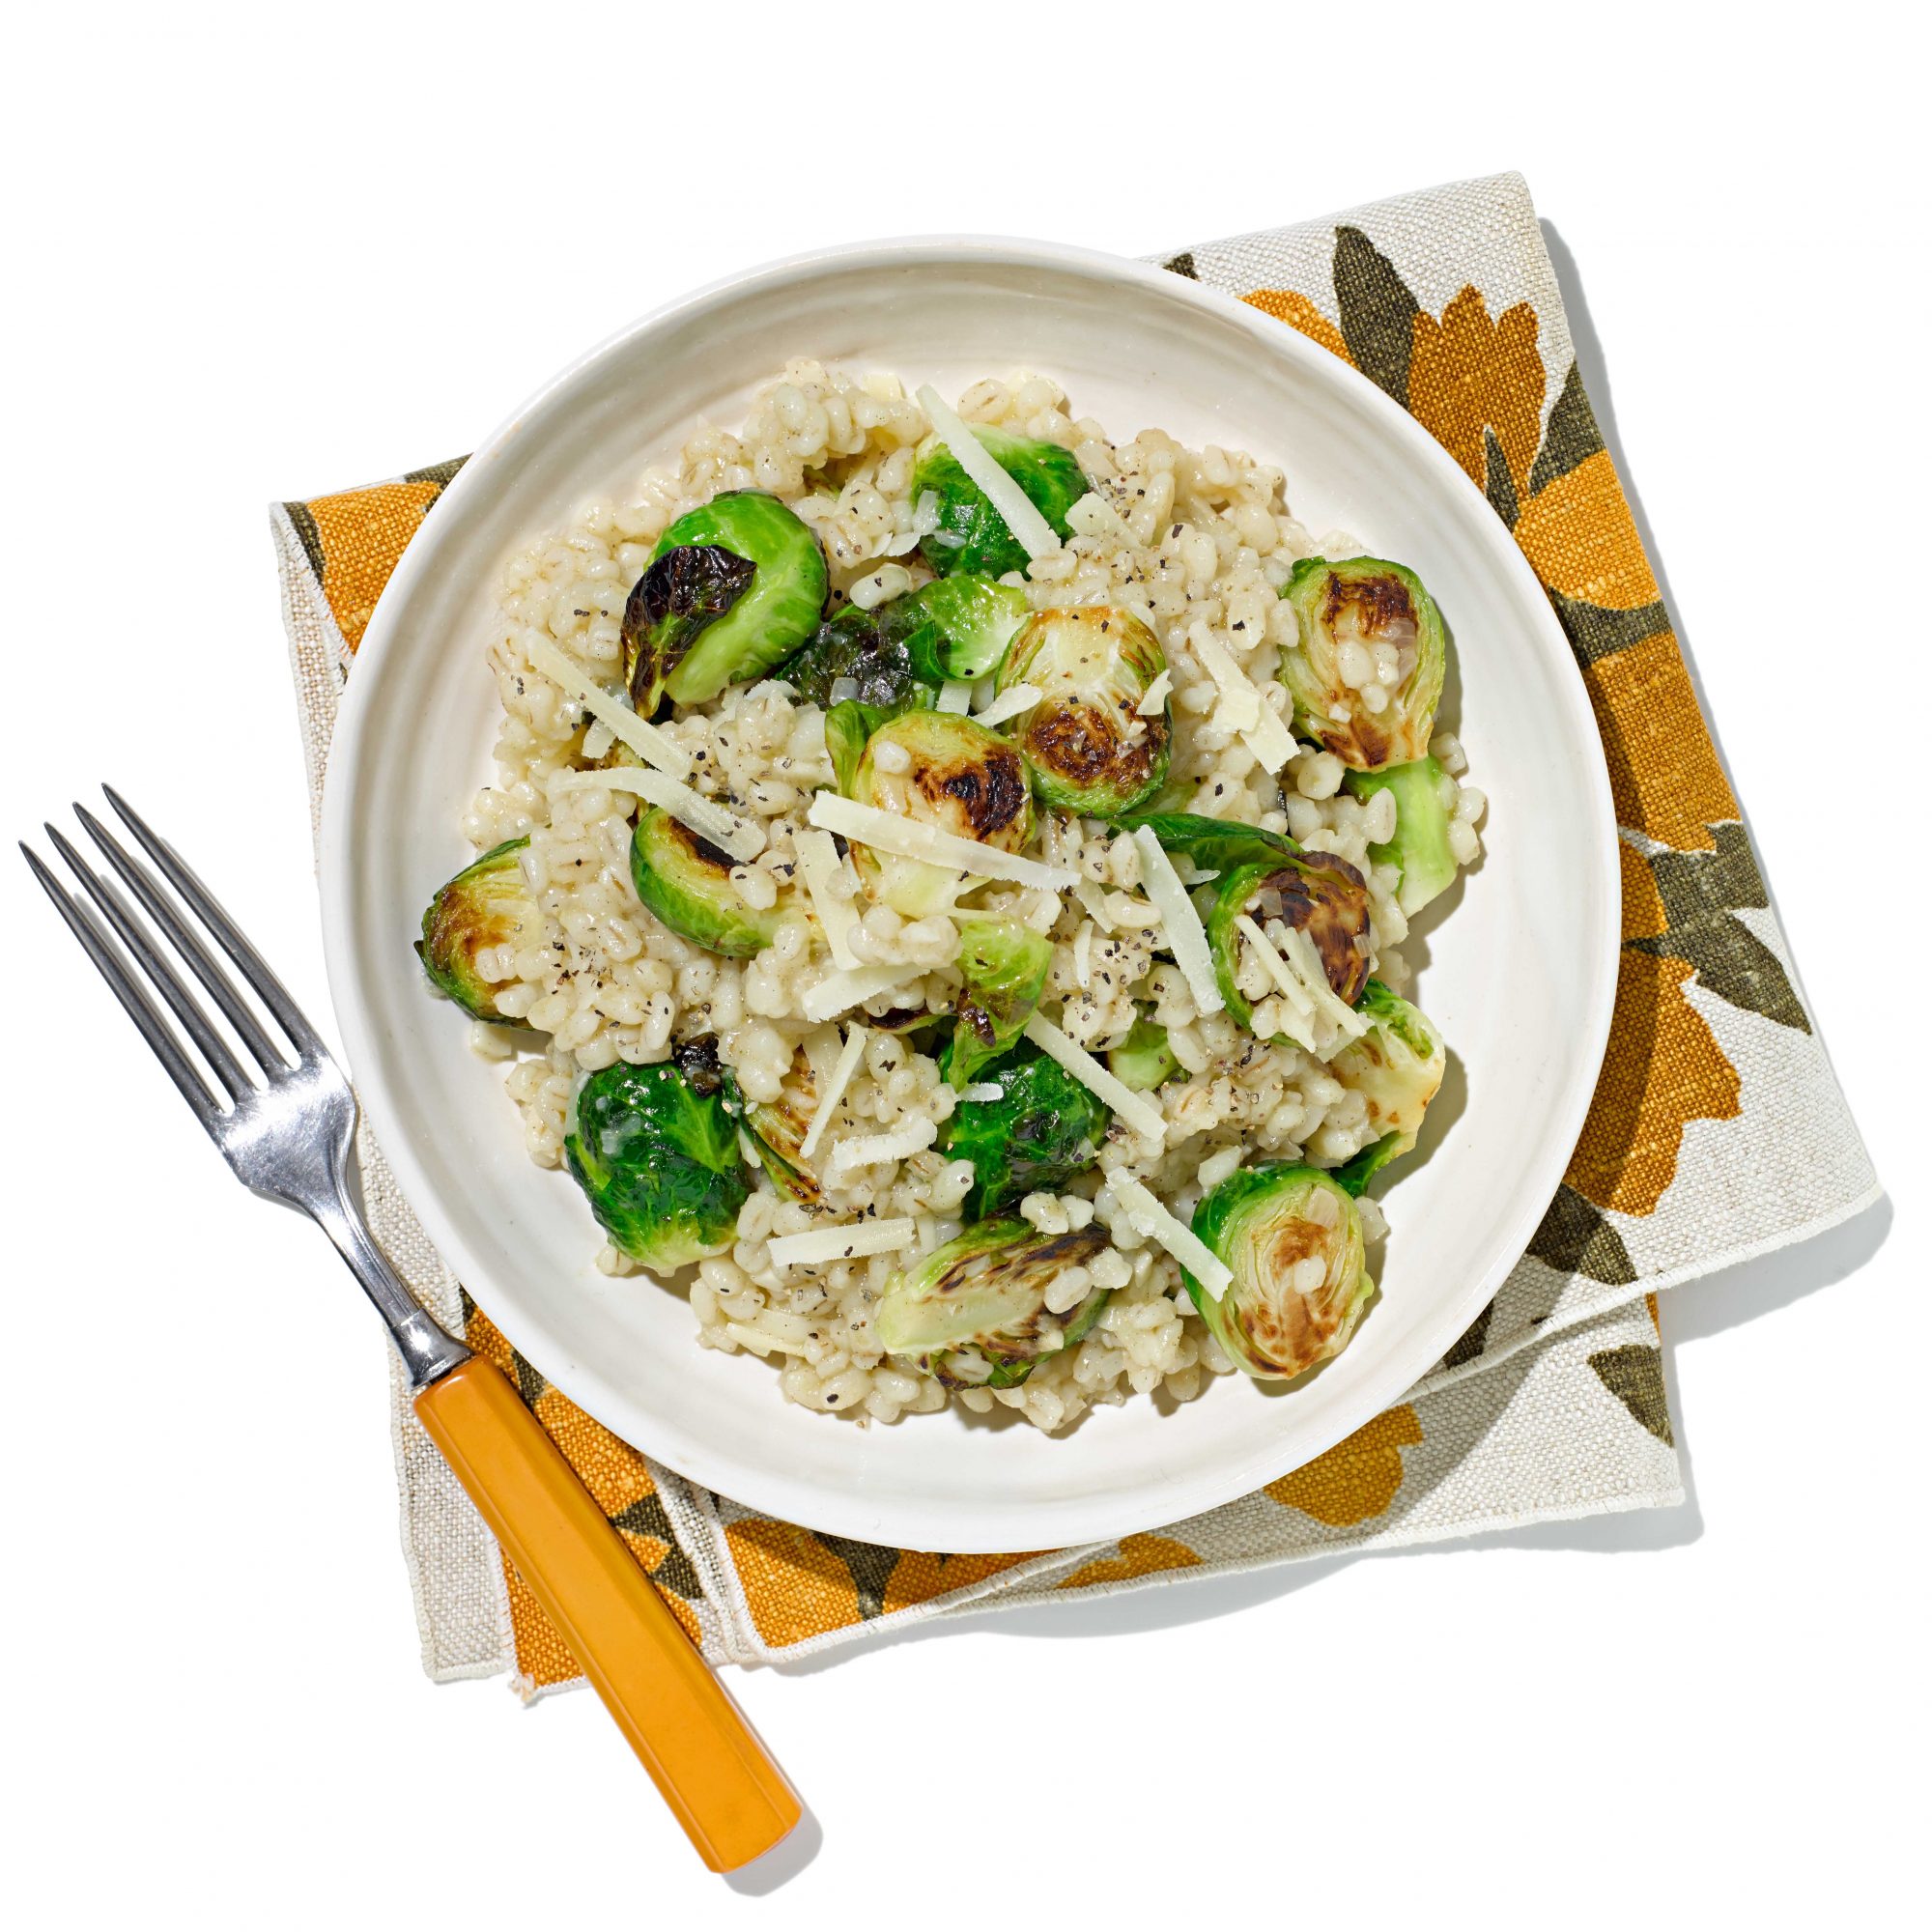 Barley & Brussels Sprouts Risotto